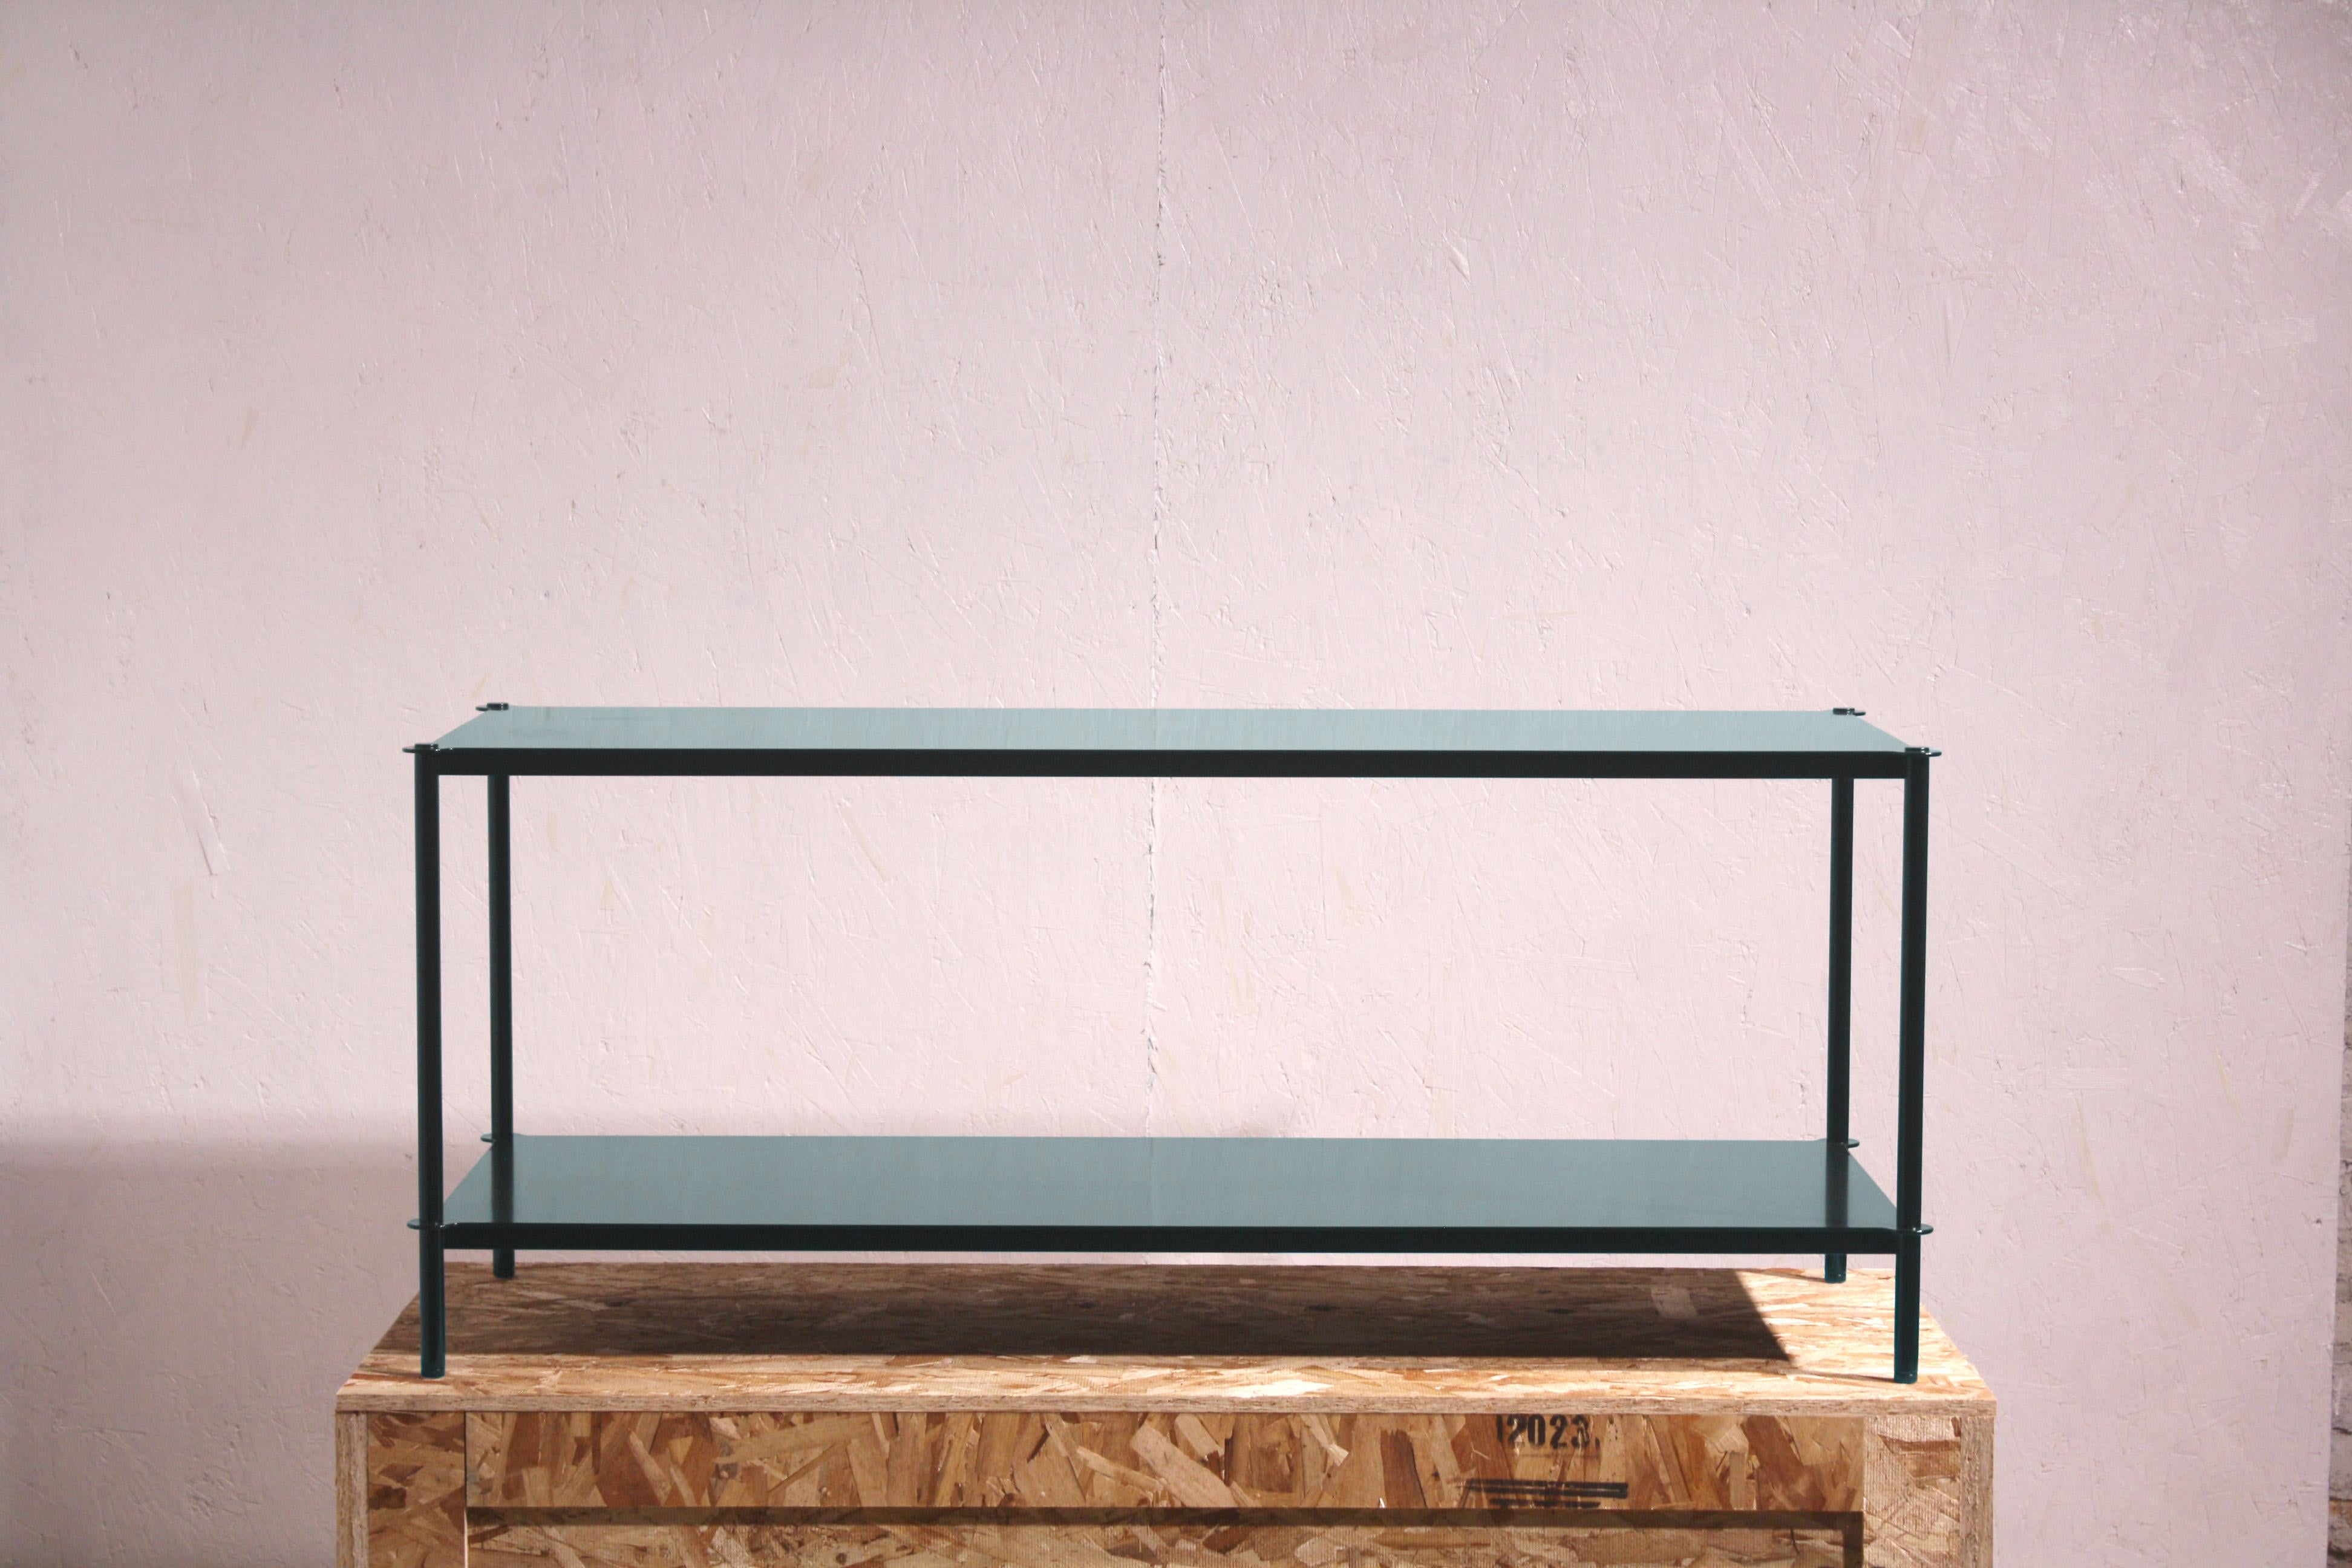 red metal console table